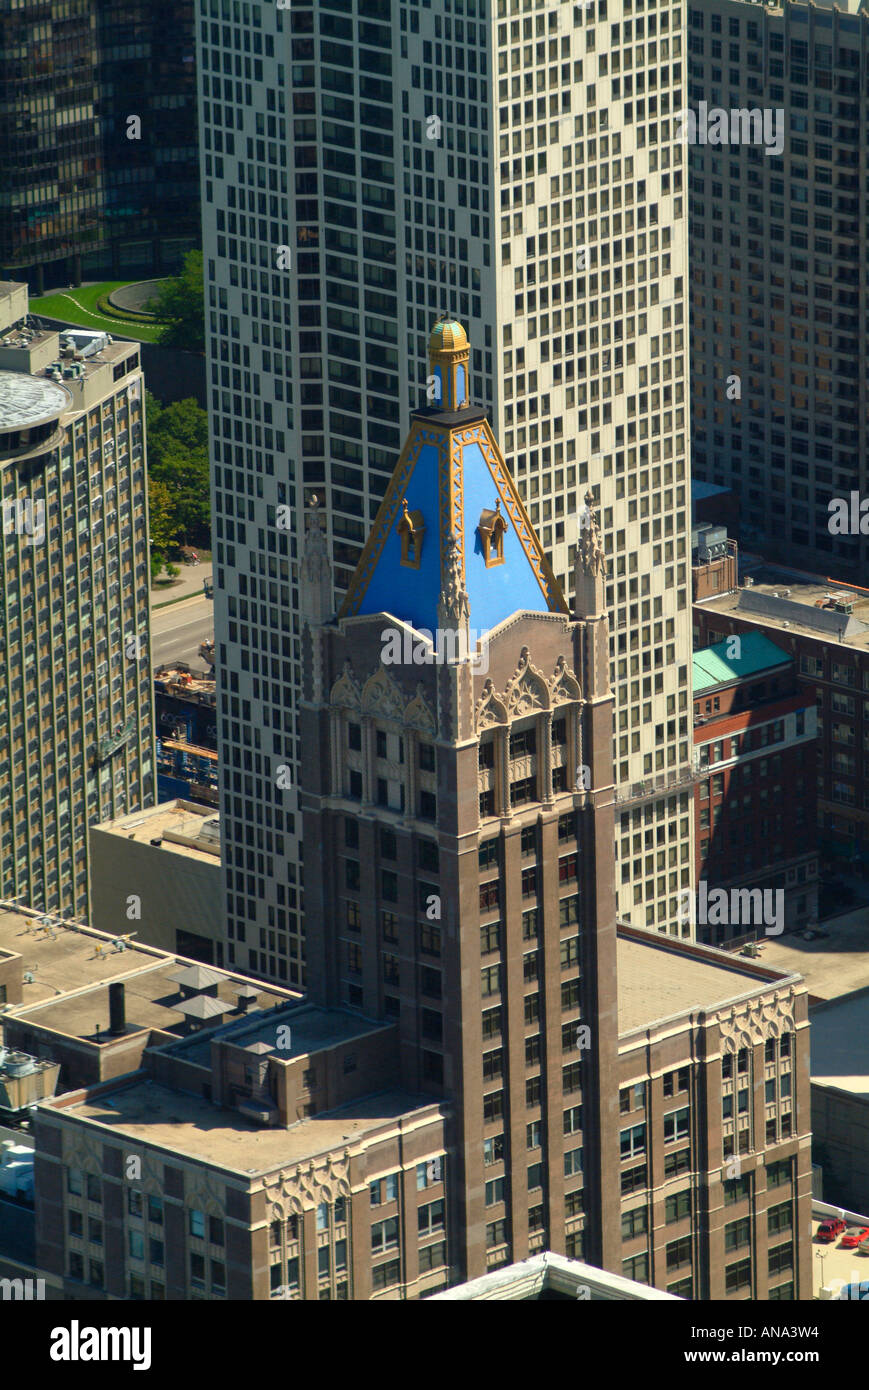 Aerial View of Former American Furniture Mart Building and Playboy Headqurters from John Hancock Center in Chicago Illinois USA Stock Photo